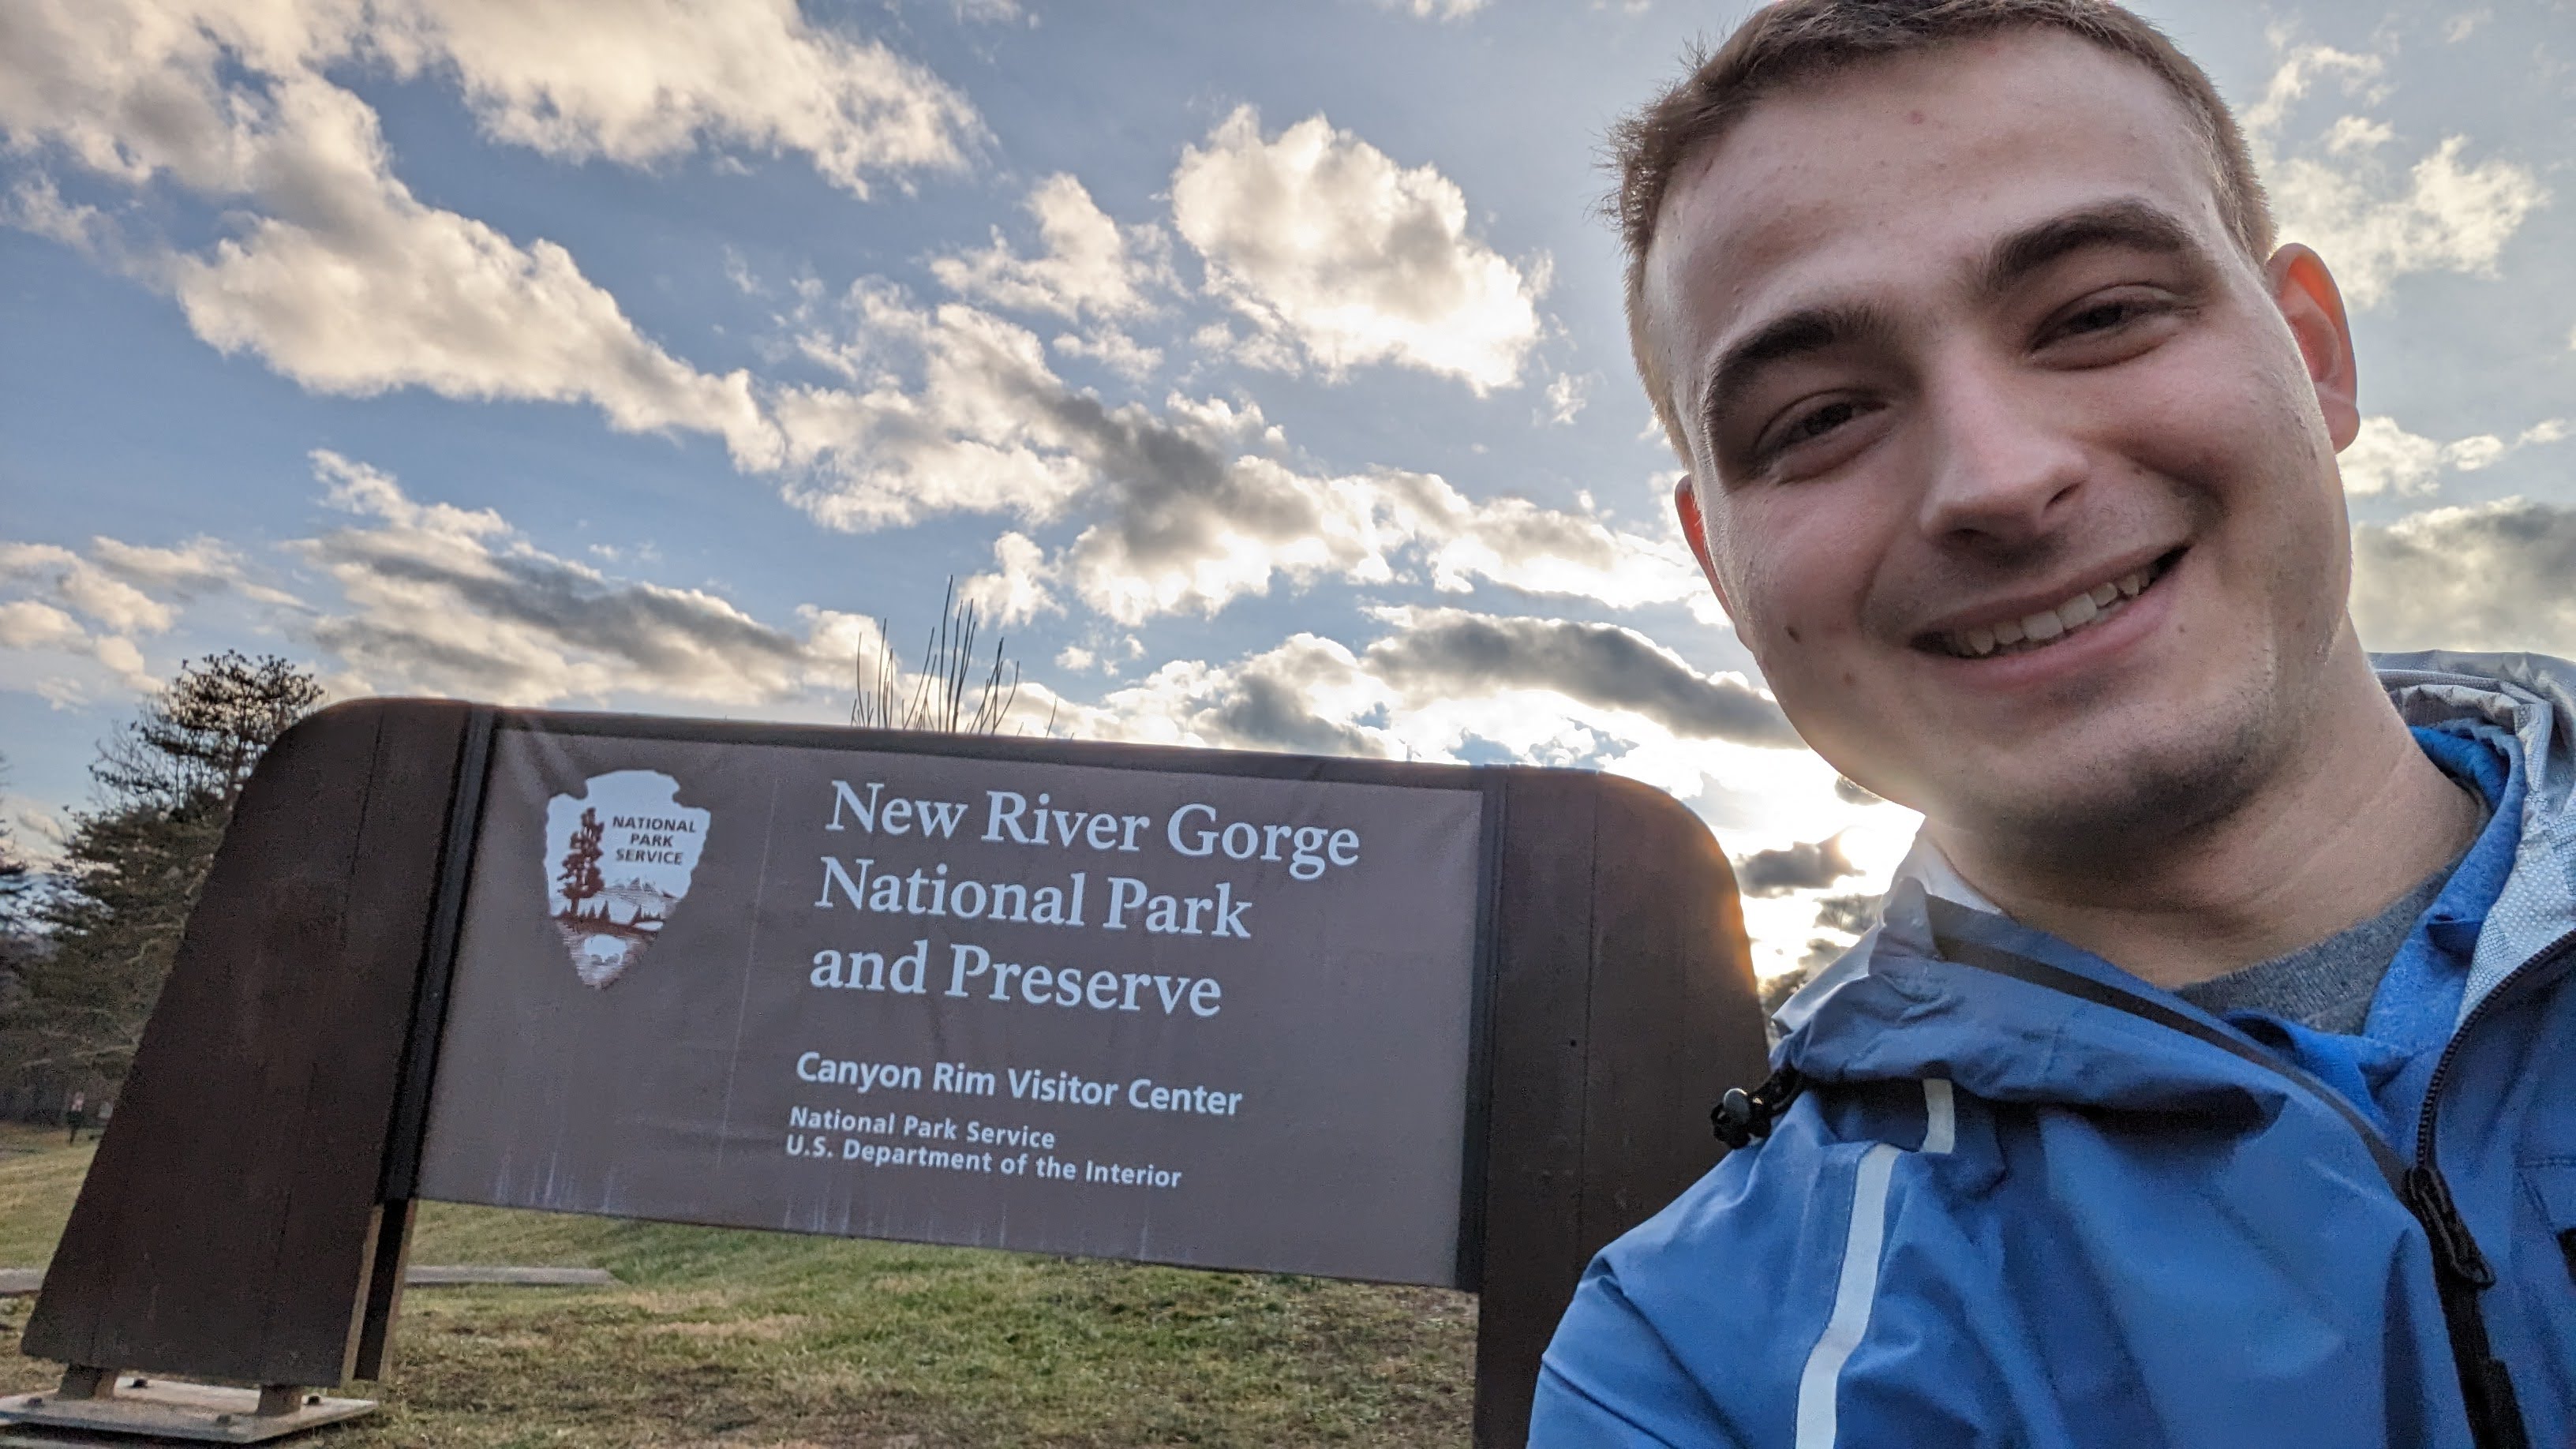 A picture in front of the new river gorge welcome sign